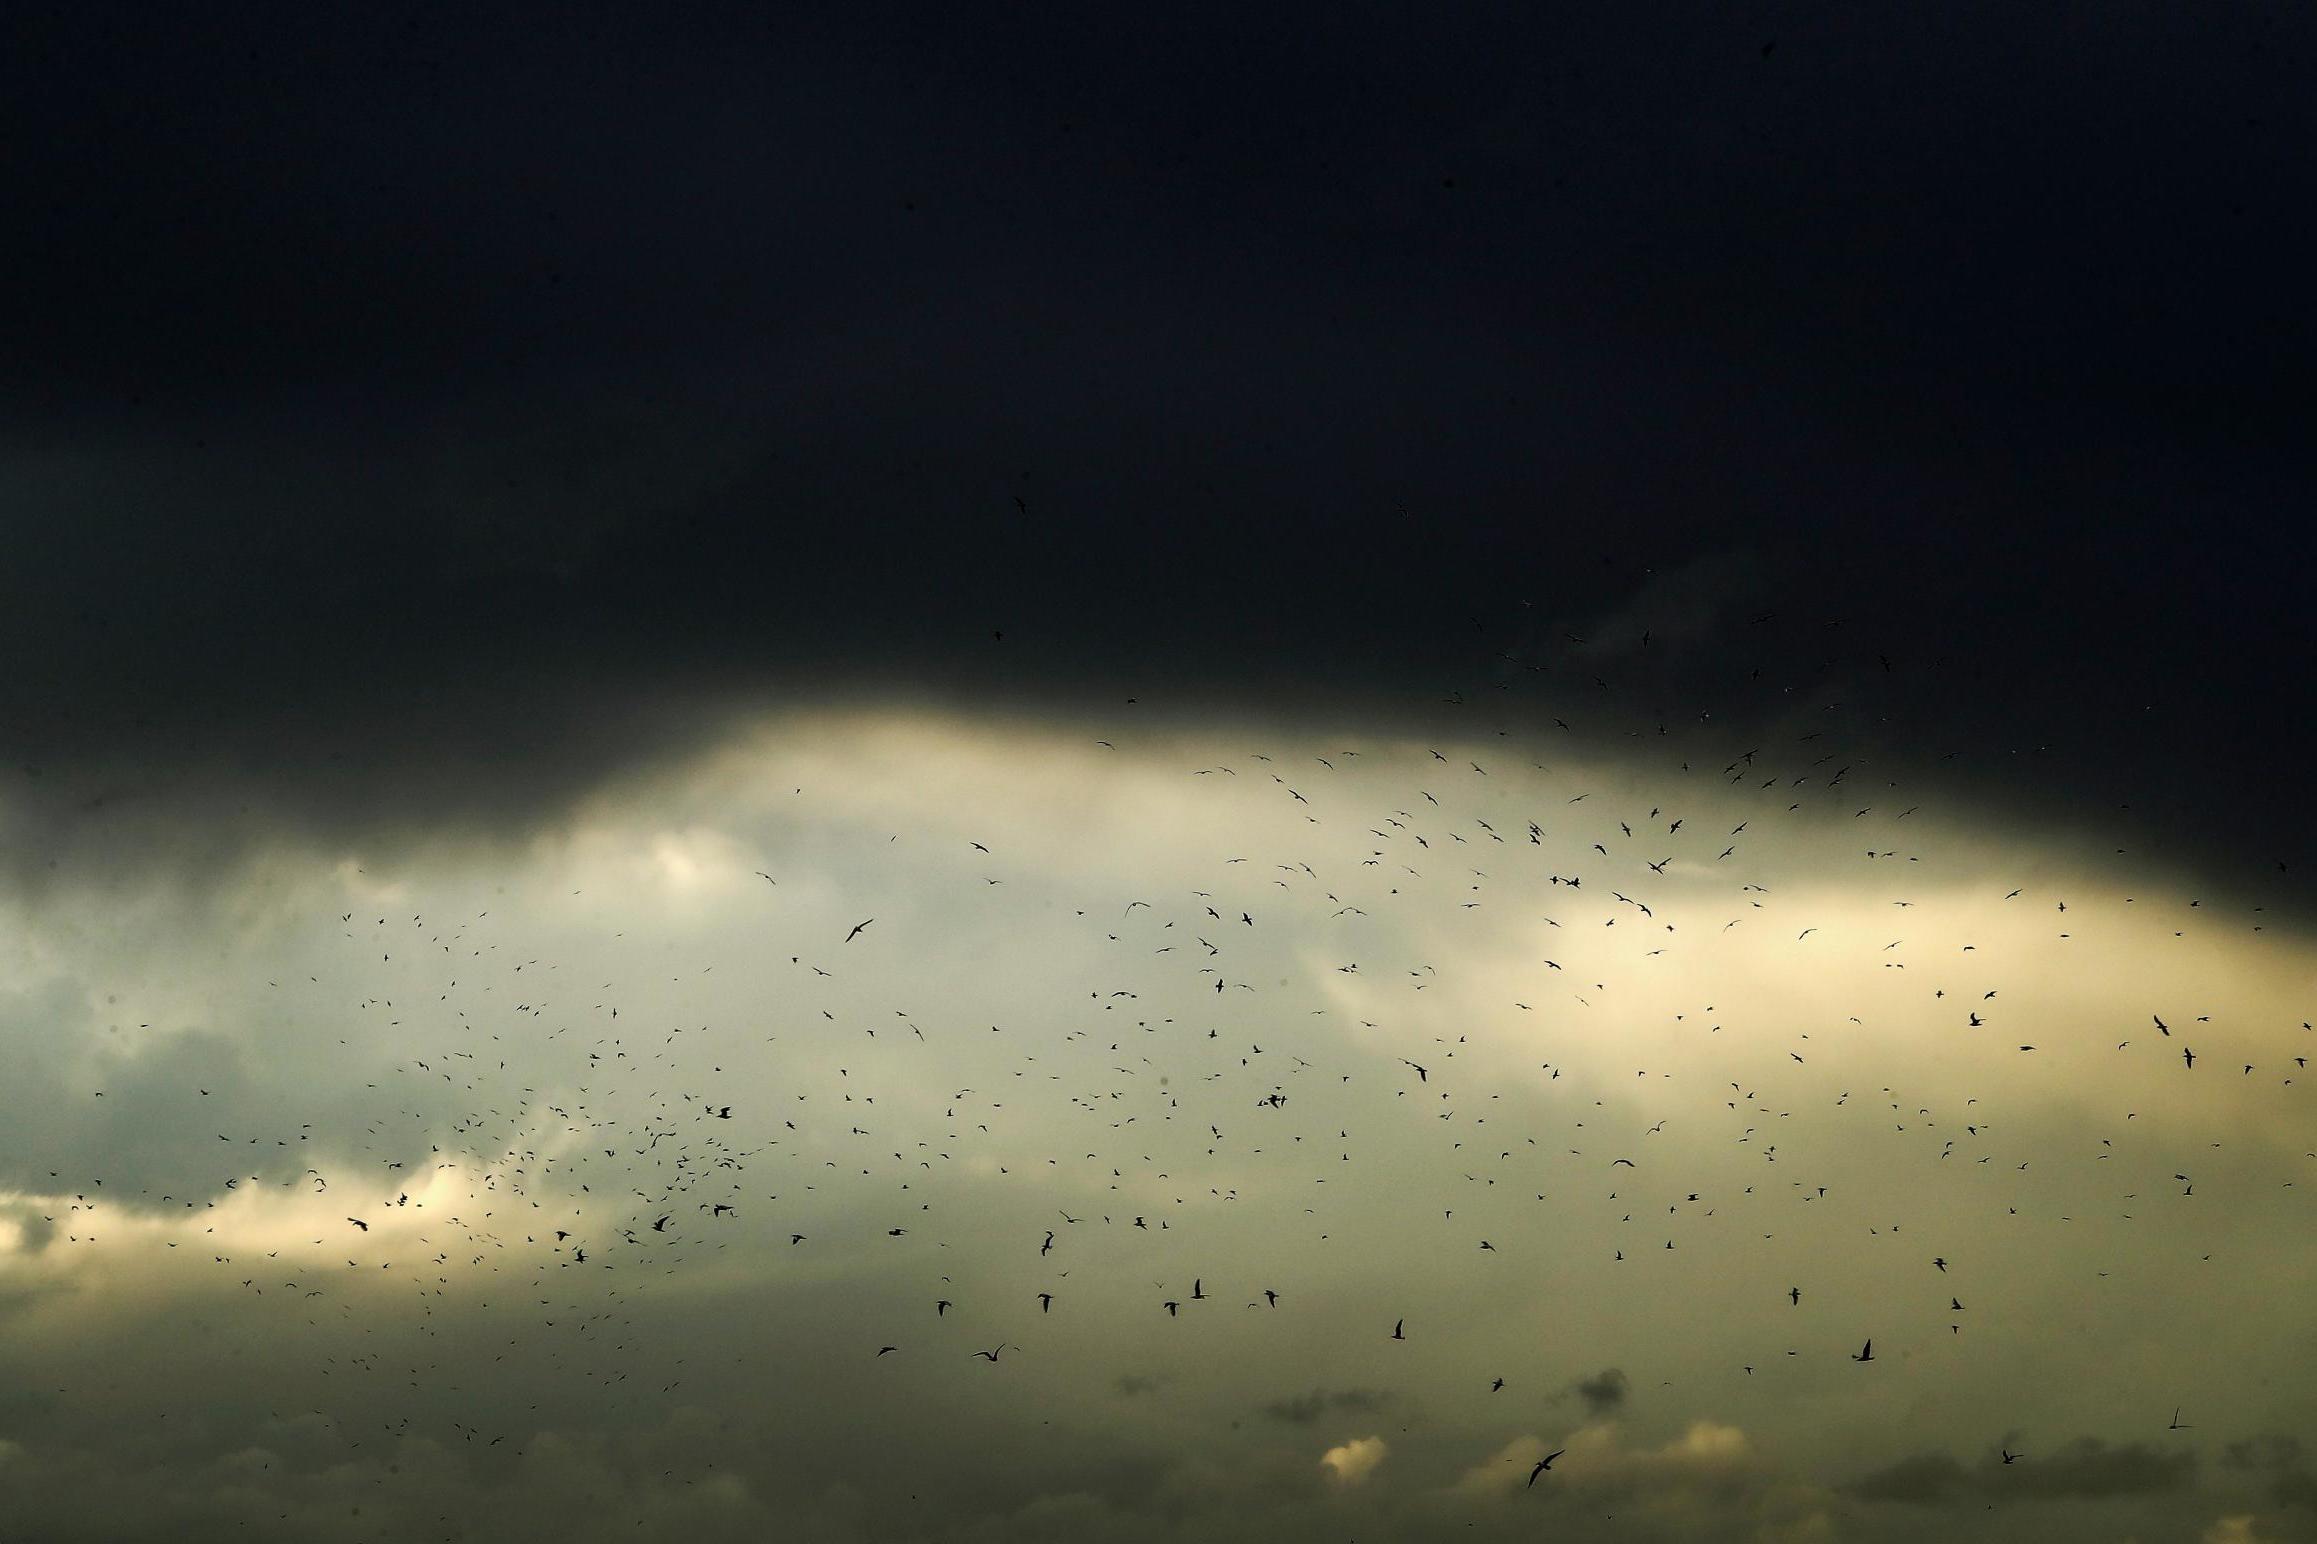 Seagulls fly under a heavy storm cloud off the coast of the Lebanese capital Beirut (Getty)